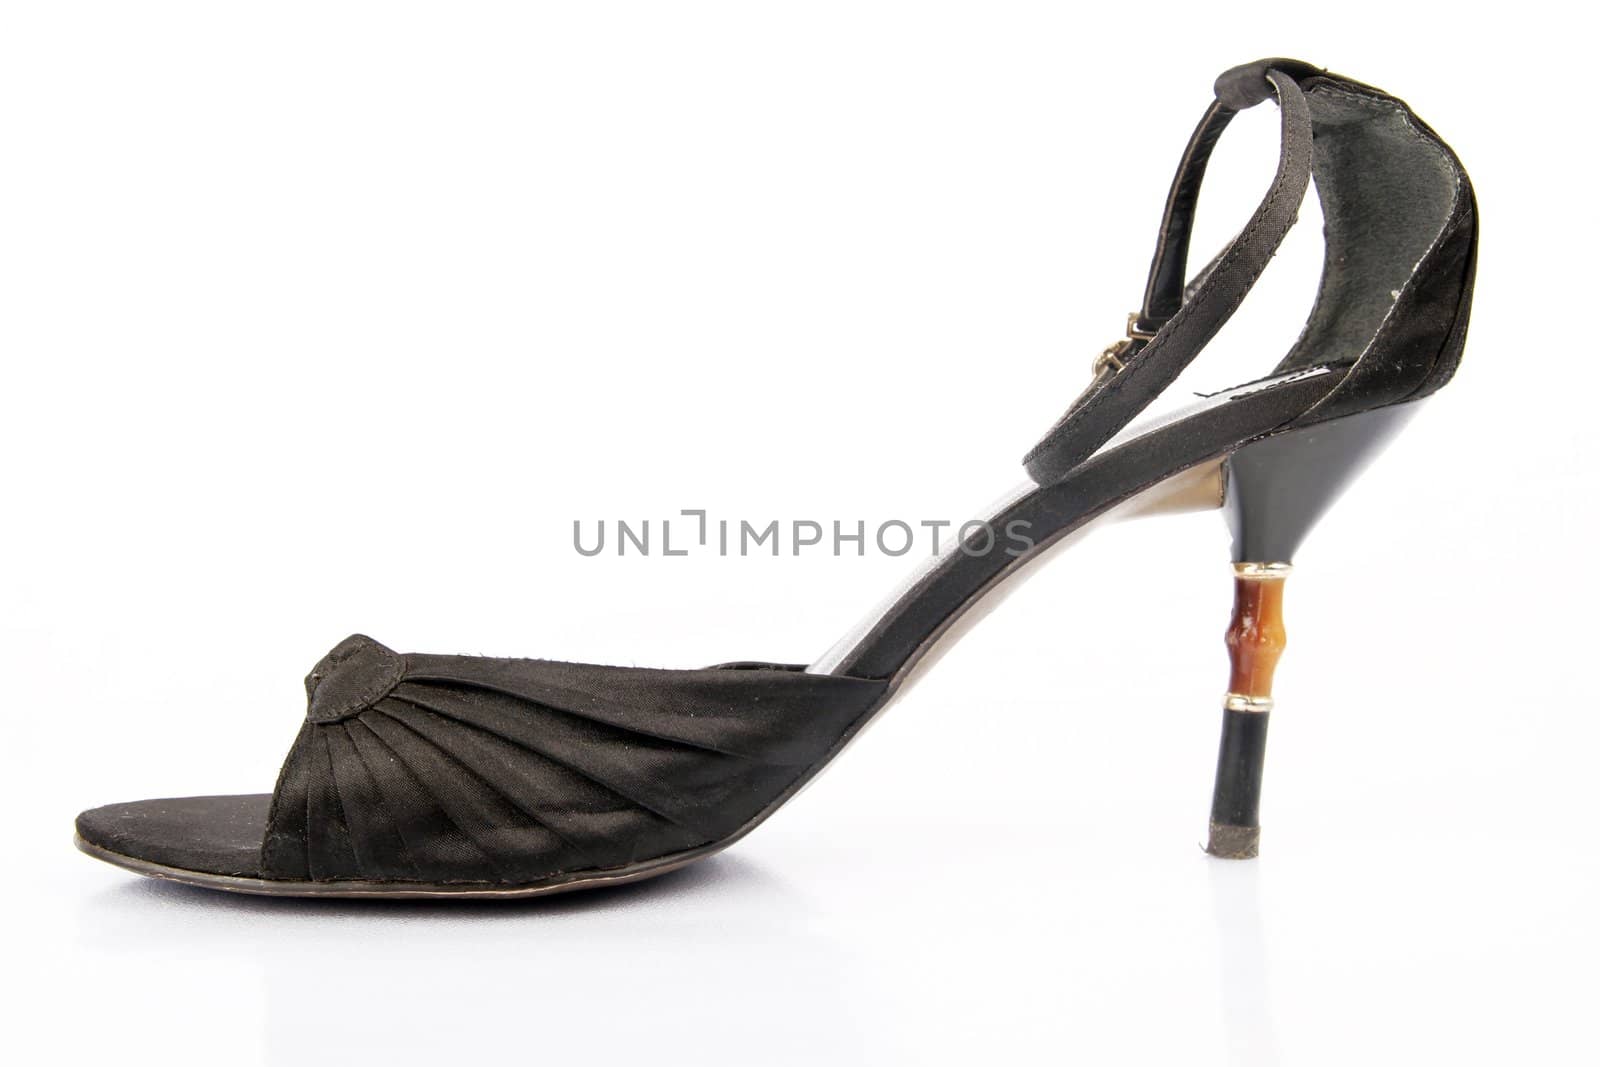 Black high heel women shoes on white background.